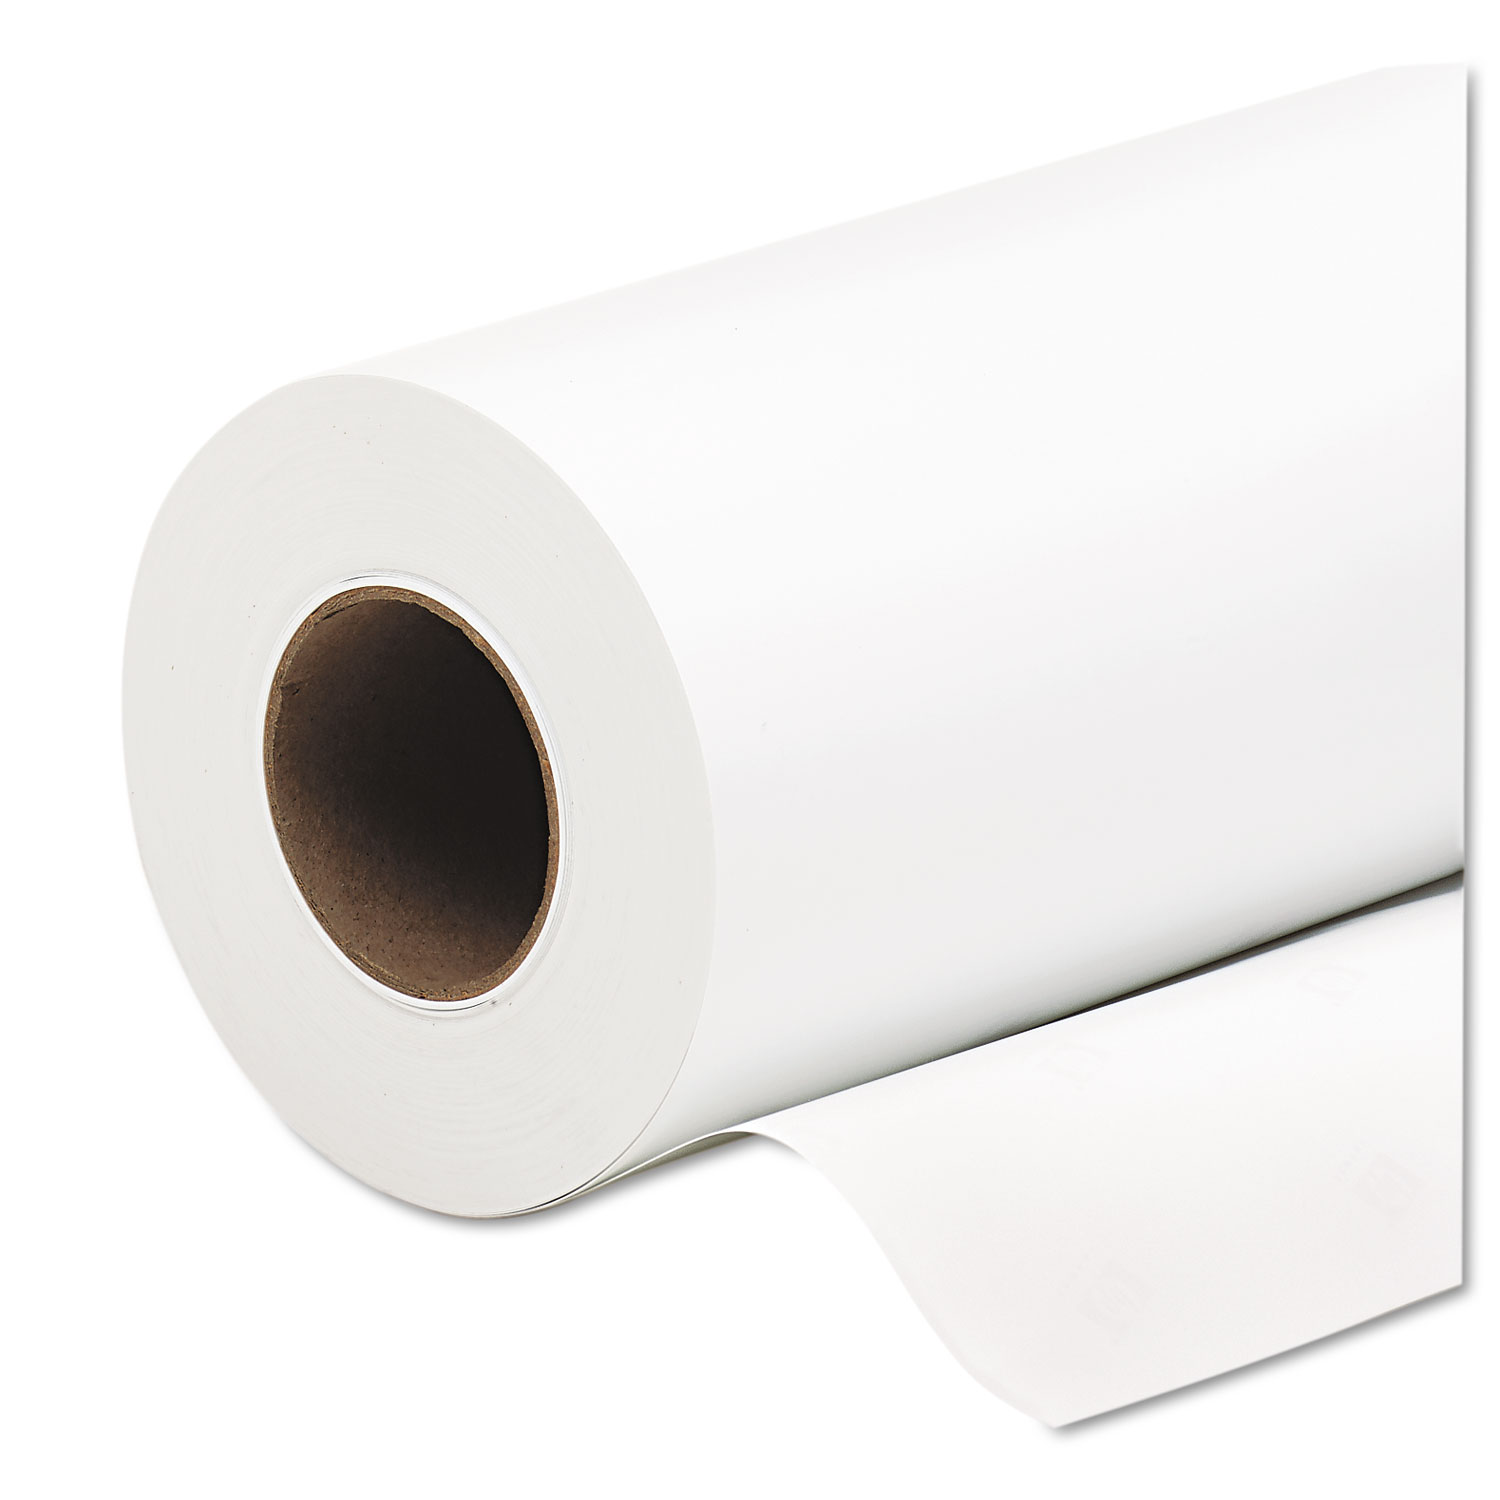  HP Q8921A Everyday Pigment Ink Photo Paper Roll, 9.1 mil, 36 x 100 ft, Satin White (HEWQ8921A) 